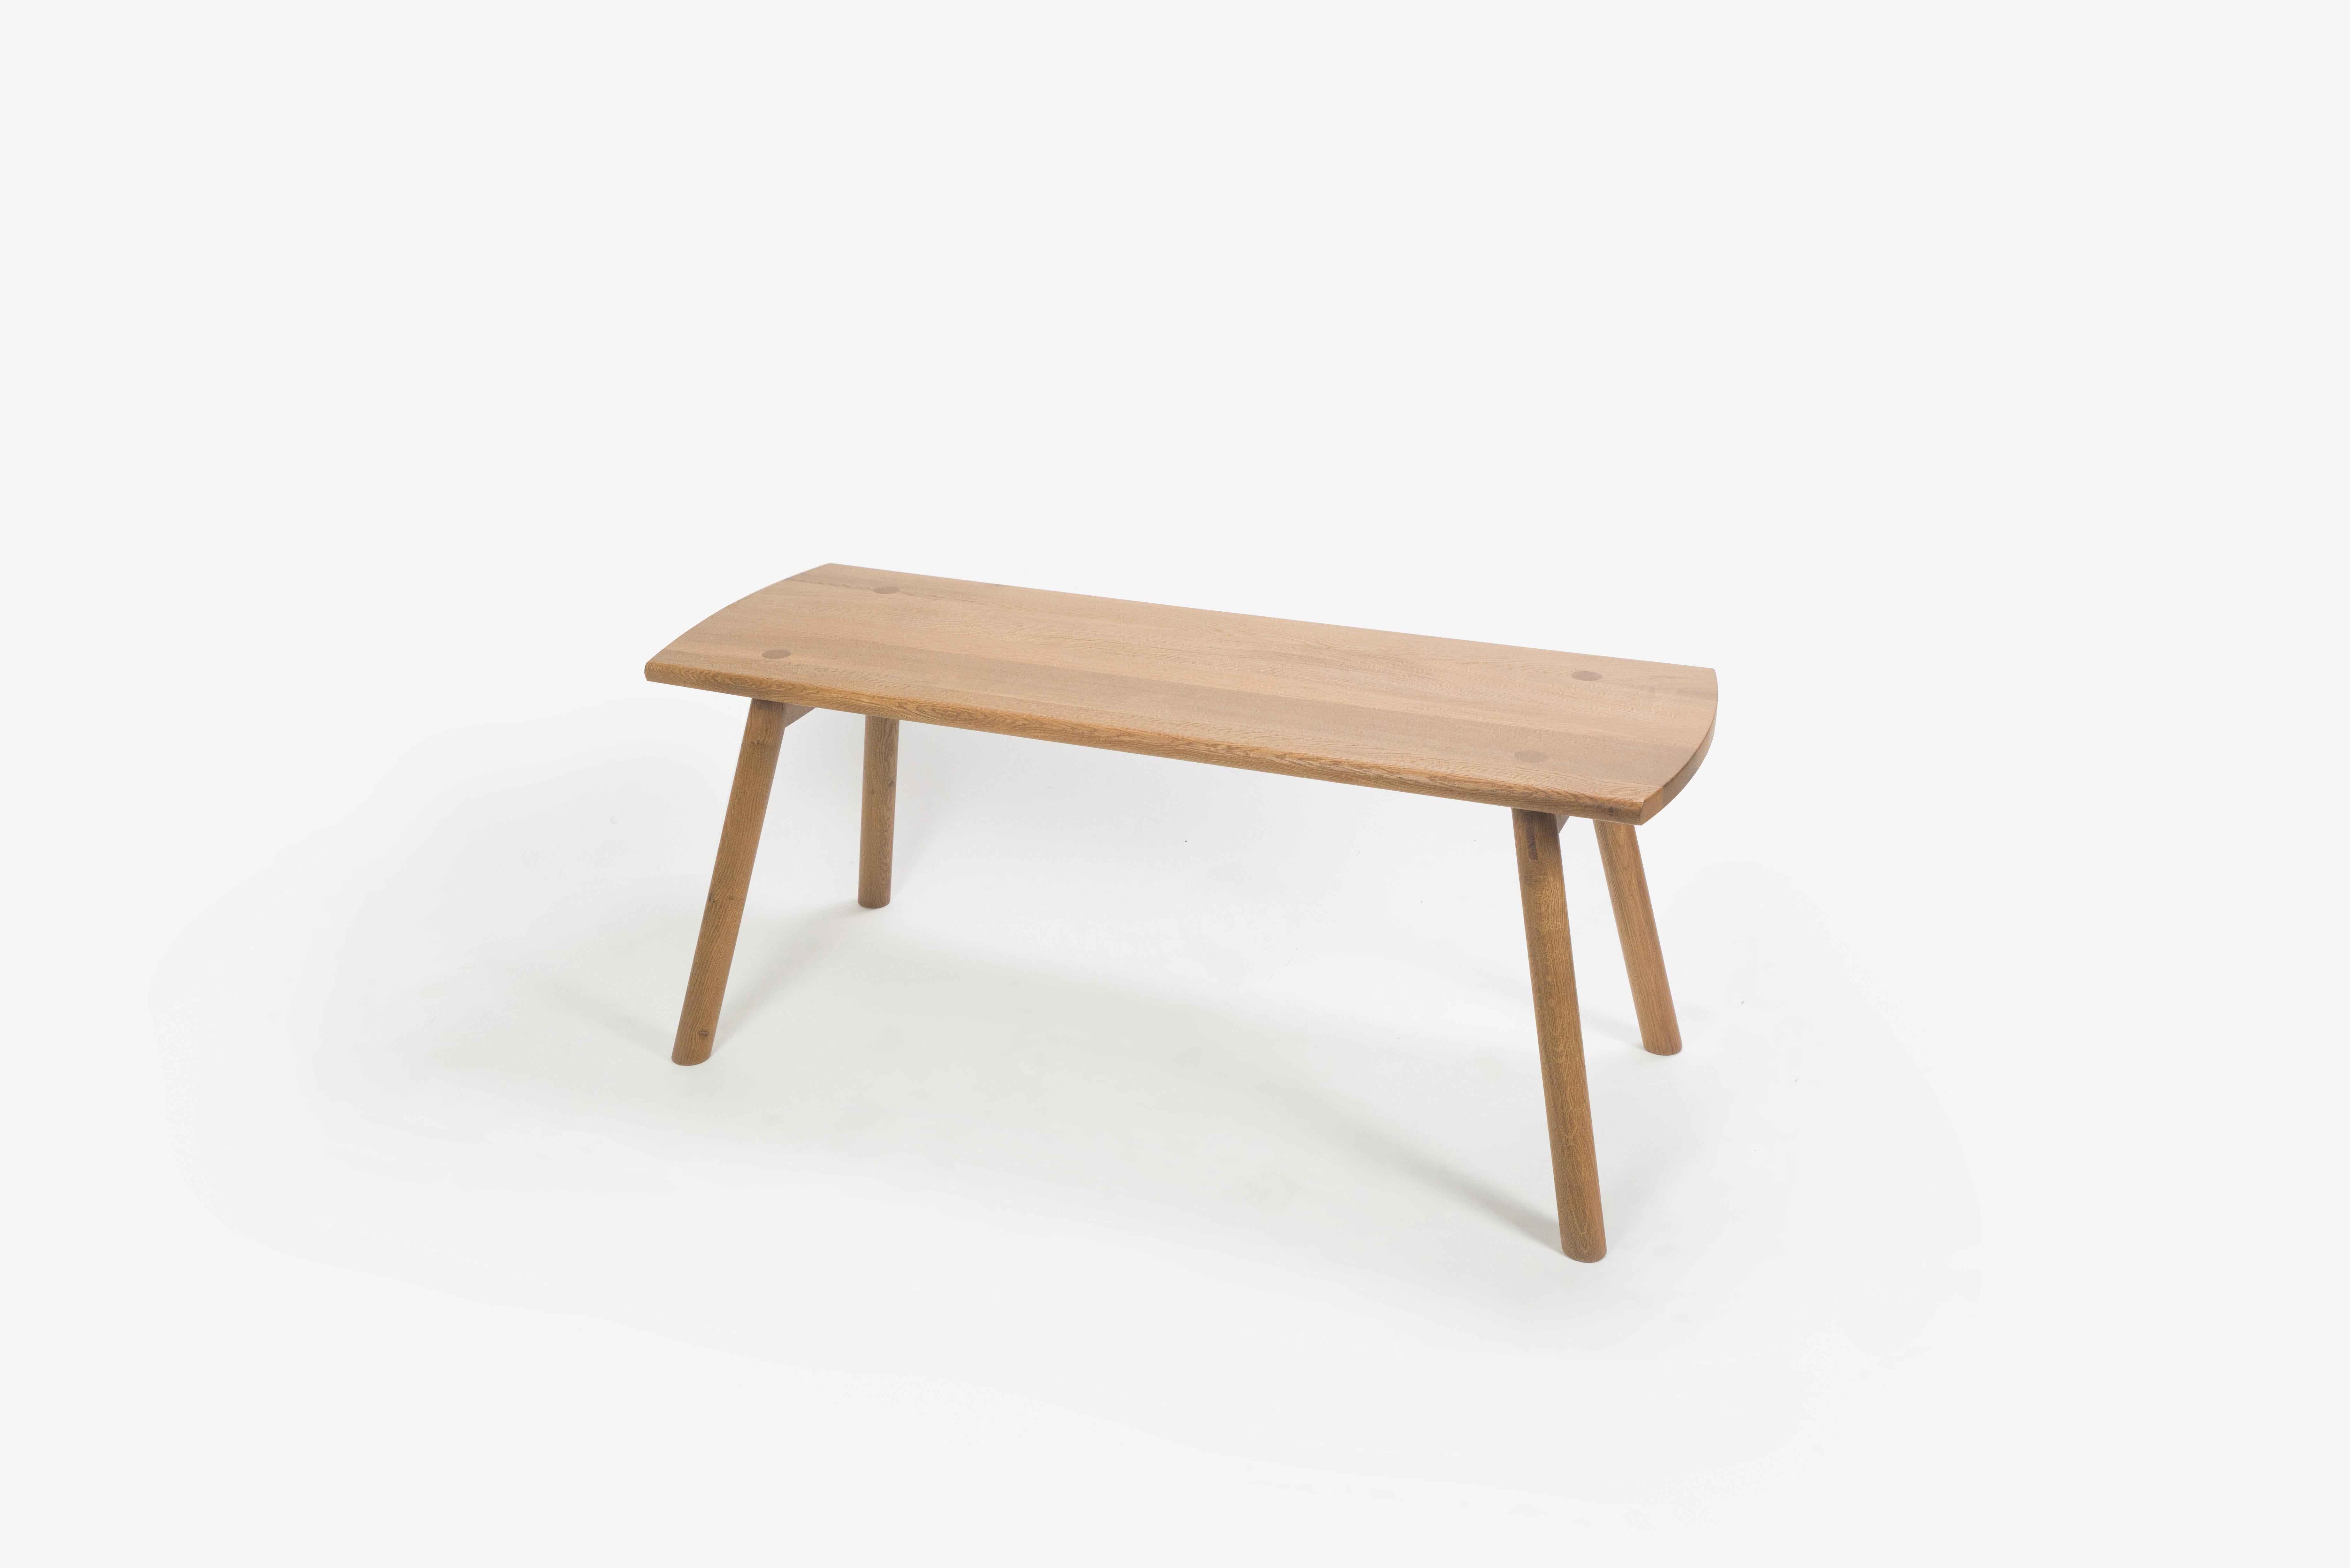 Sun at Six is a contemporary furniture design studio that works with traditional Chinese joinery masters to handcraft our pieces using traditional joinery. The Sol bench is made with traditional joinery techniques with visible exposed tenons,